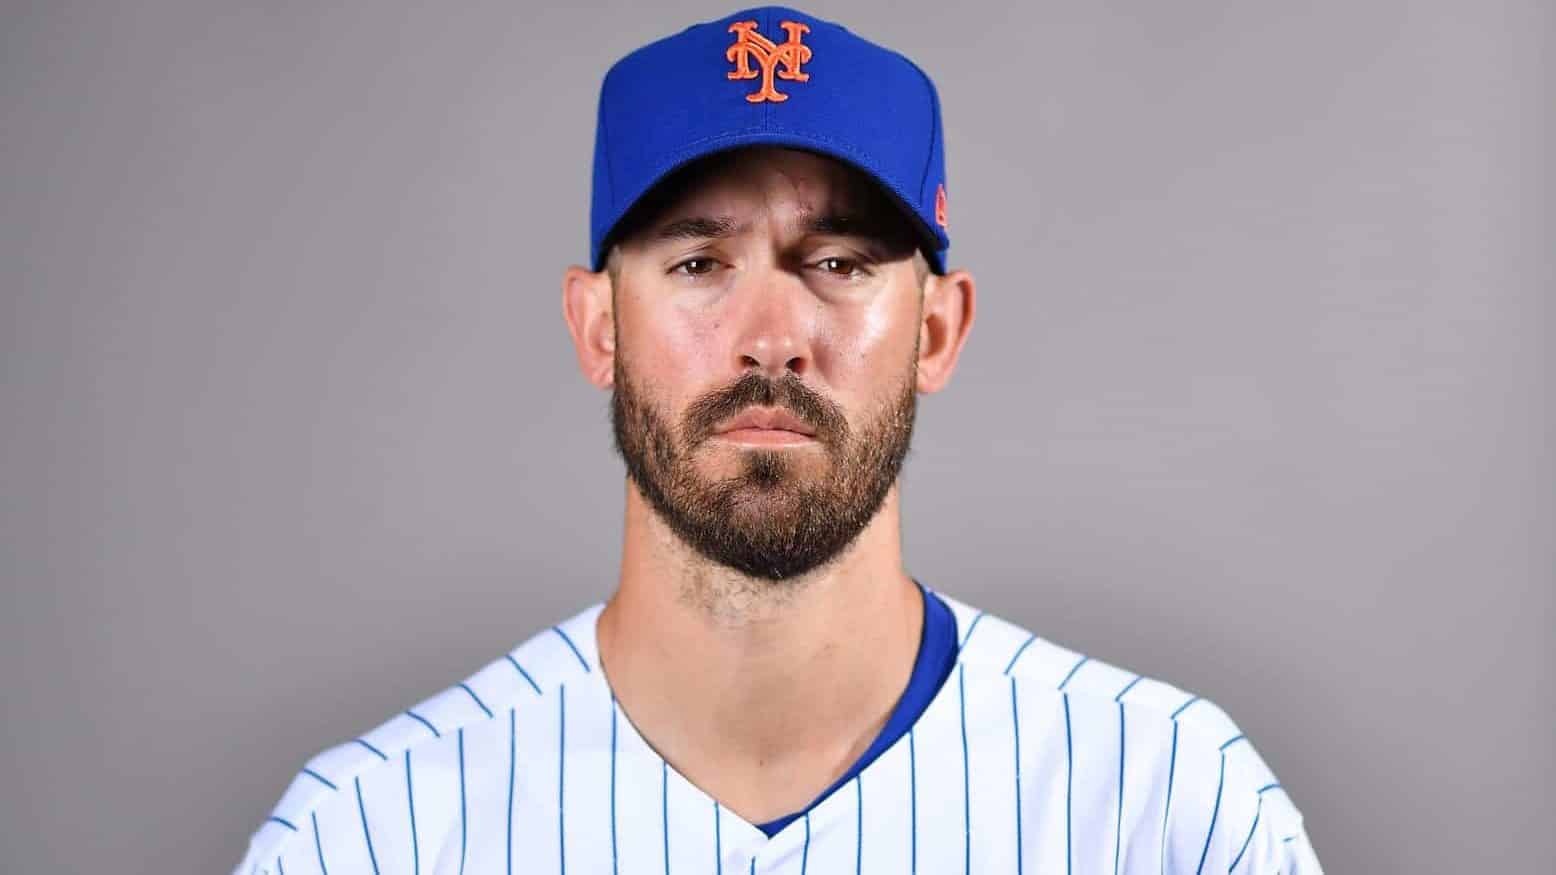 PORT ST. LUCIE, FLORIDA - FEBRUARY 20: Rick Porcello #22 of the New York Mets poses for a photo during Photo Day at Clover Park on February 20, 2020 in Port St. Lucie, Florida.